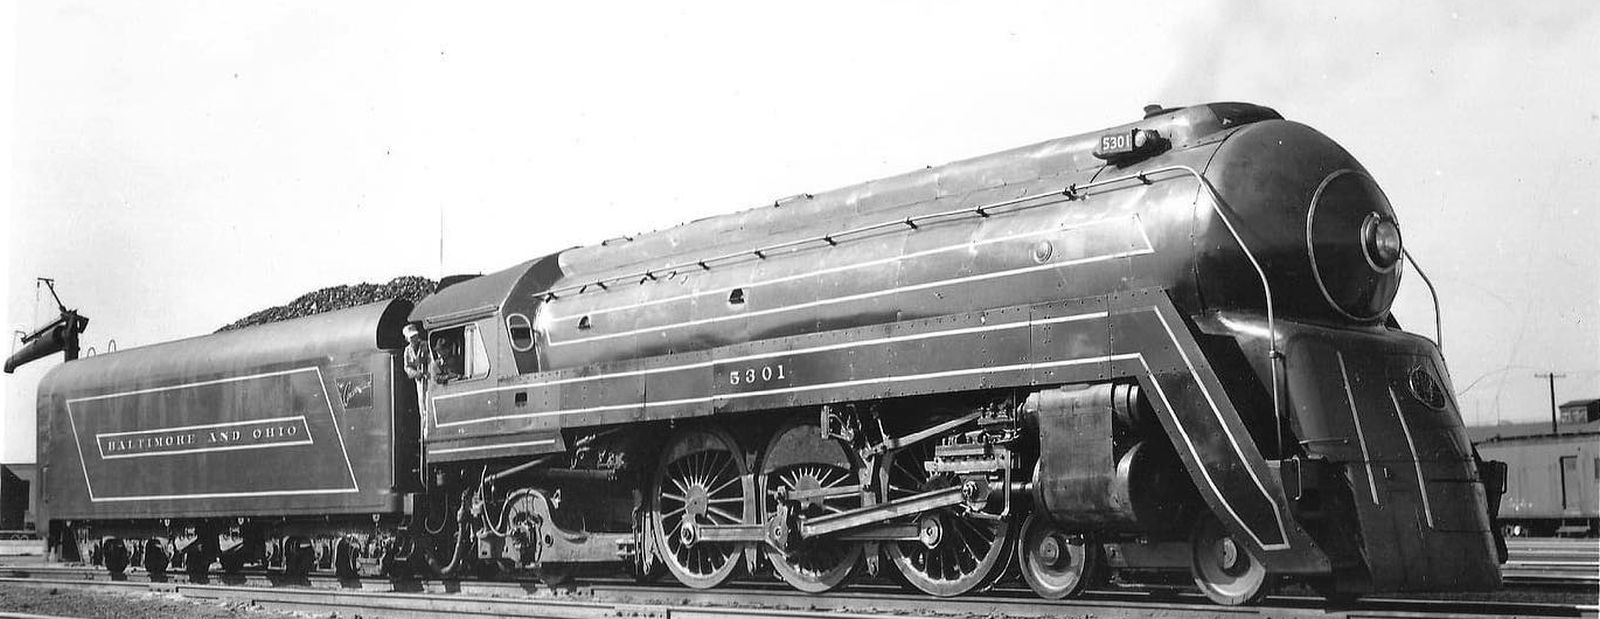 No. 5301 “President Adams” with streamlined fairing